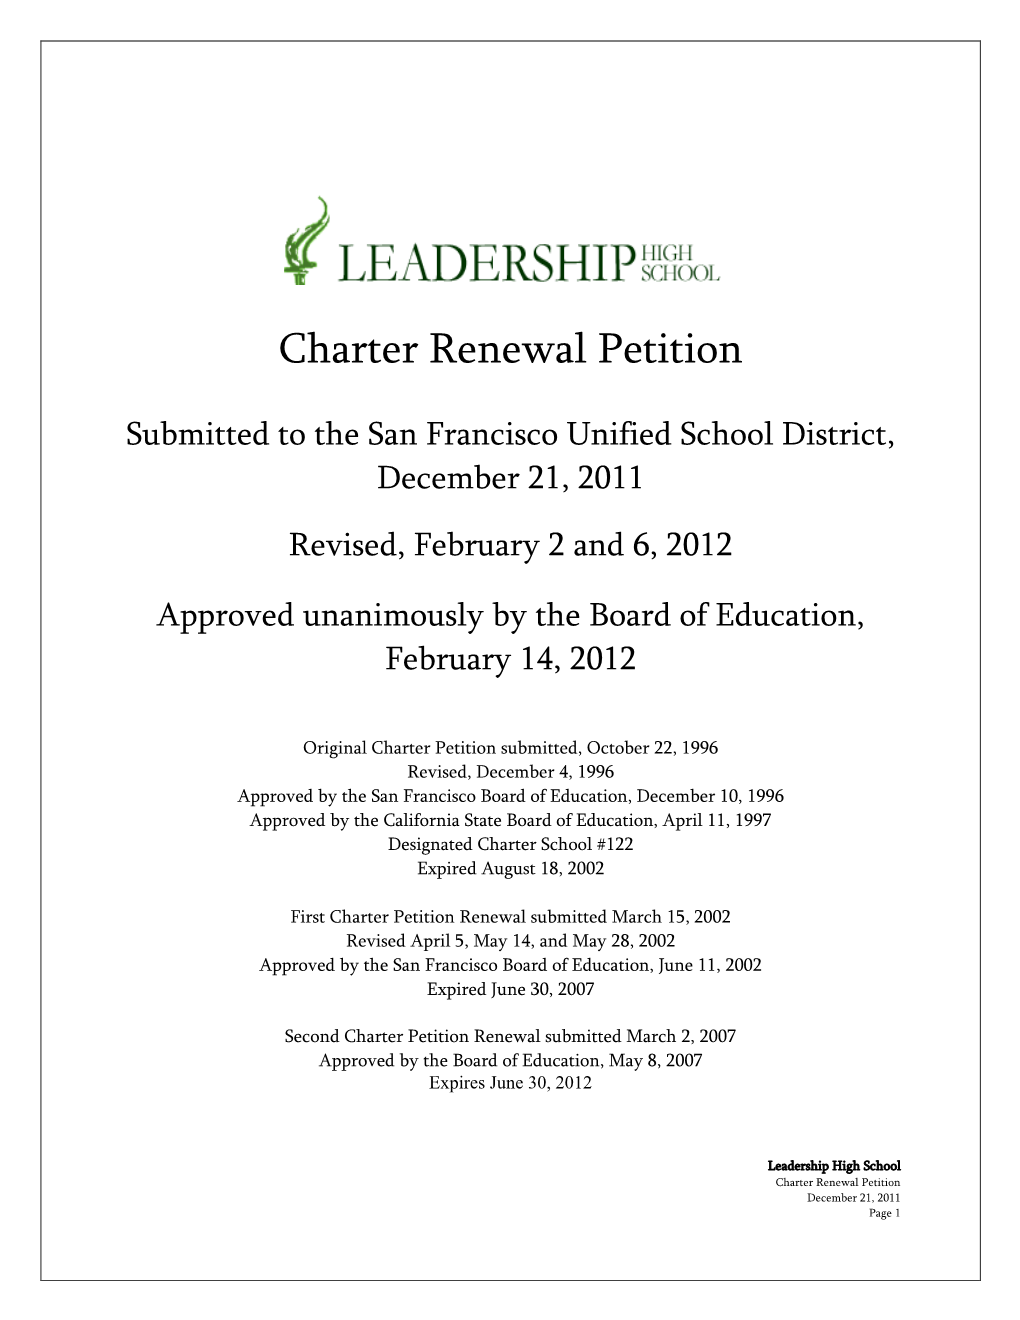 Leadership High School Charter Renewal Petition December 21, 2011 Page 1